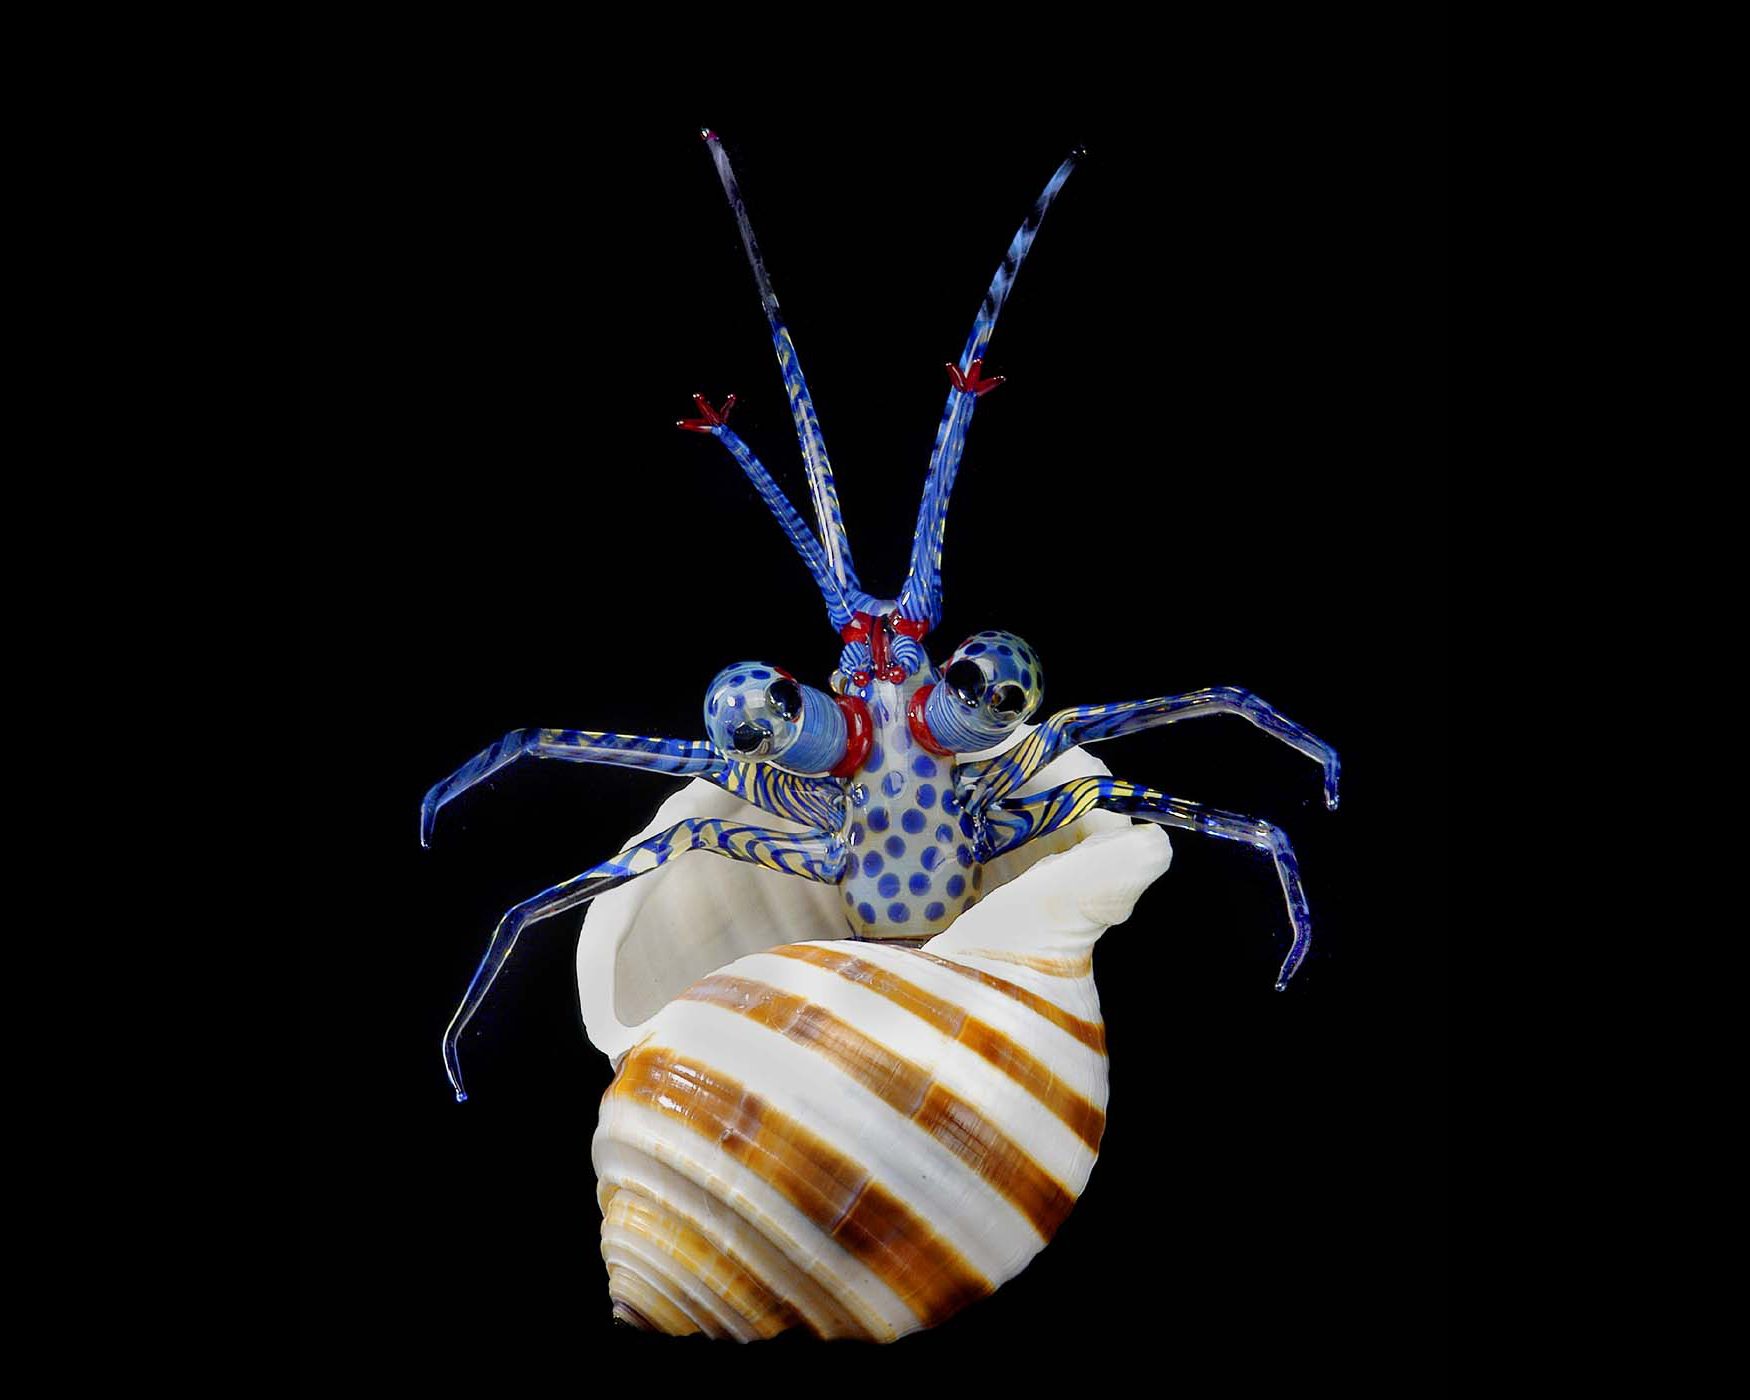 Glass sculpture of a blue hermit crab emerging from a brown and white striped shell.